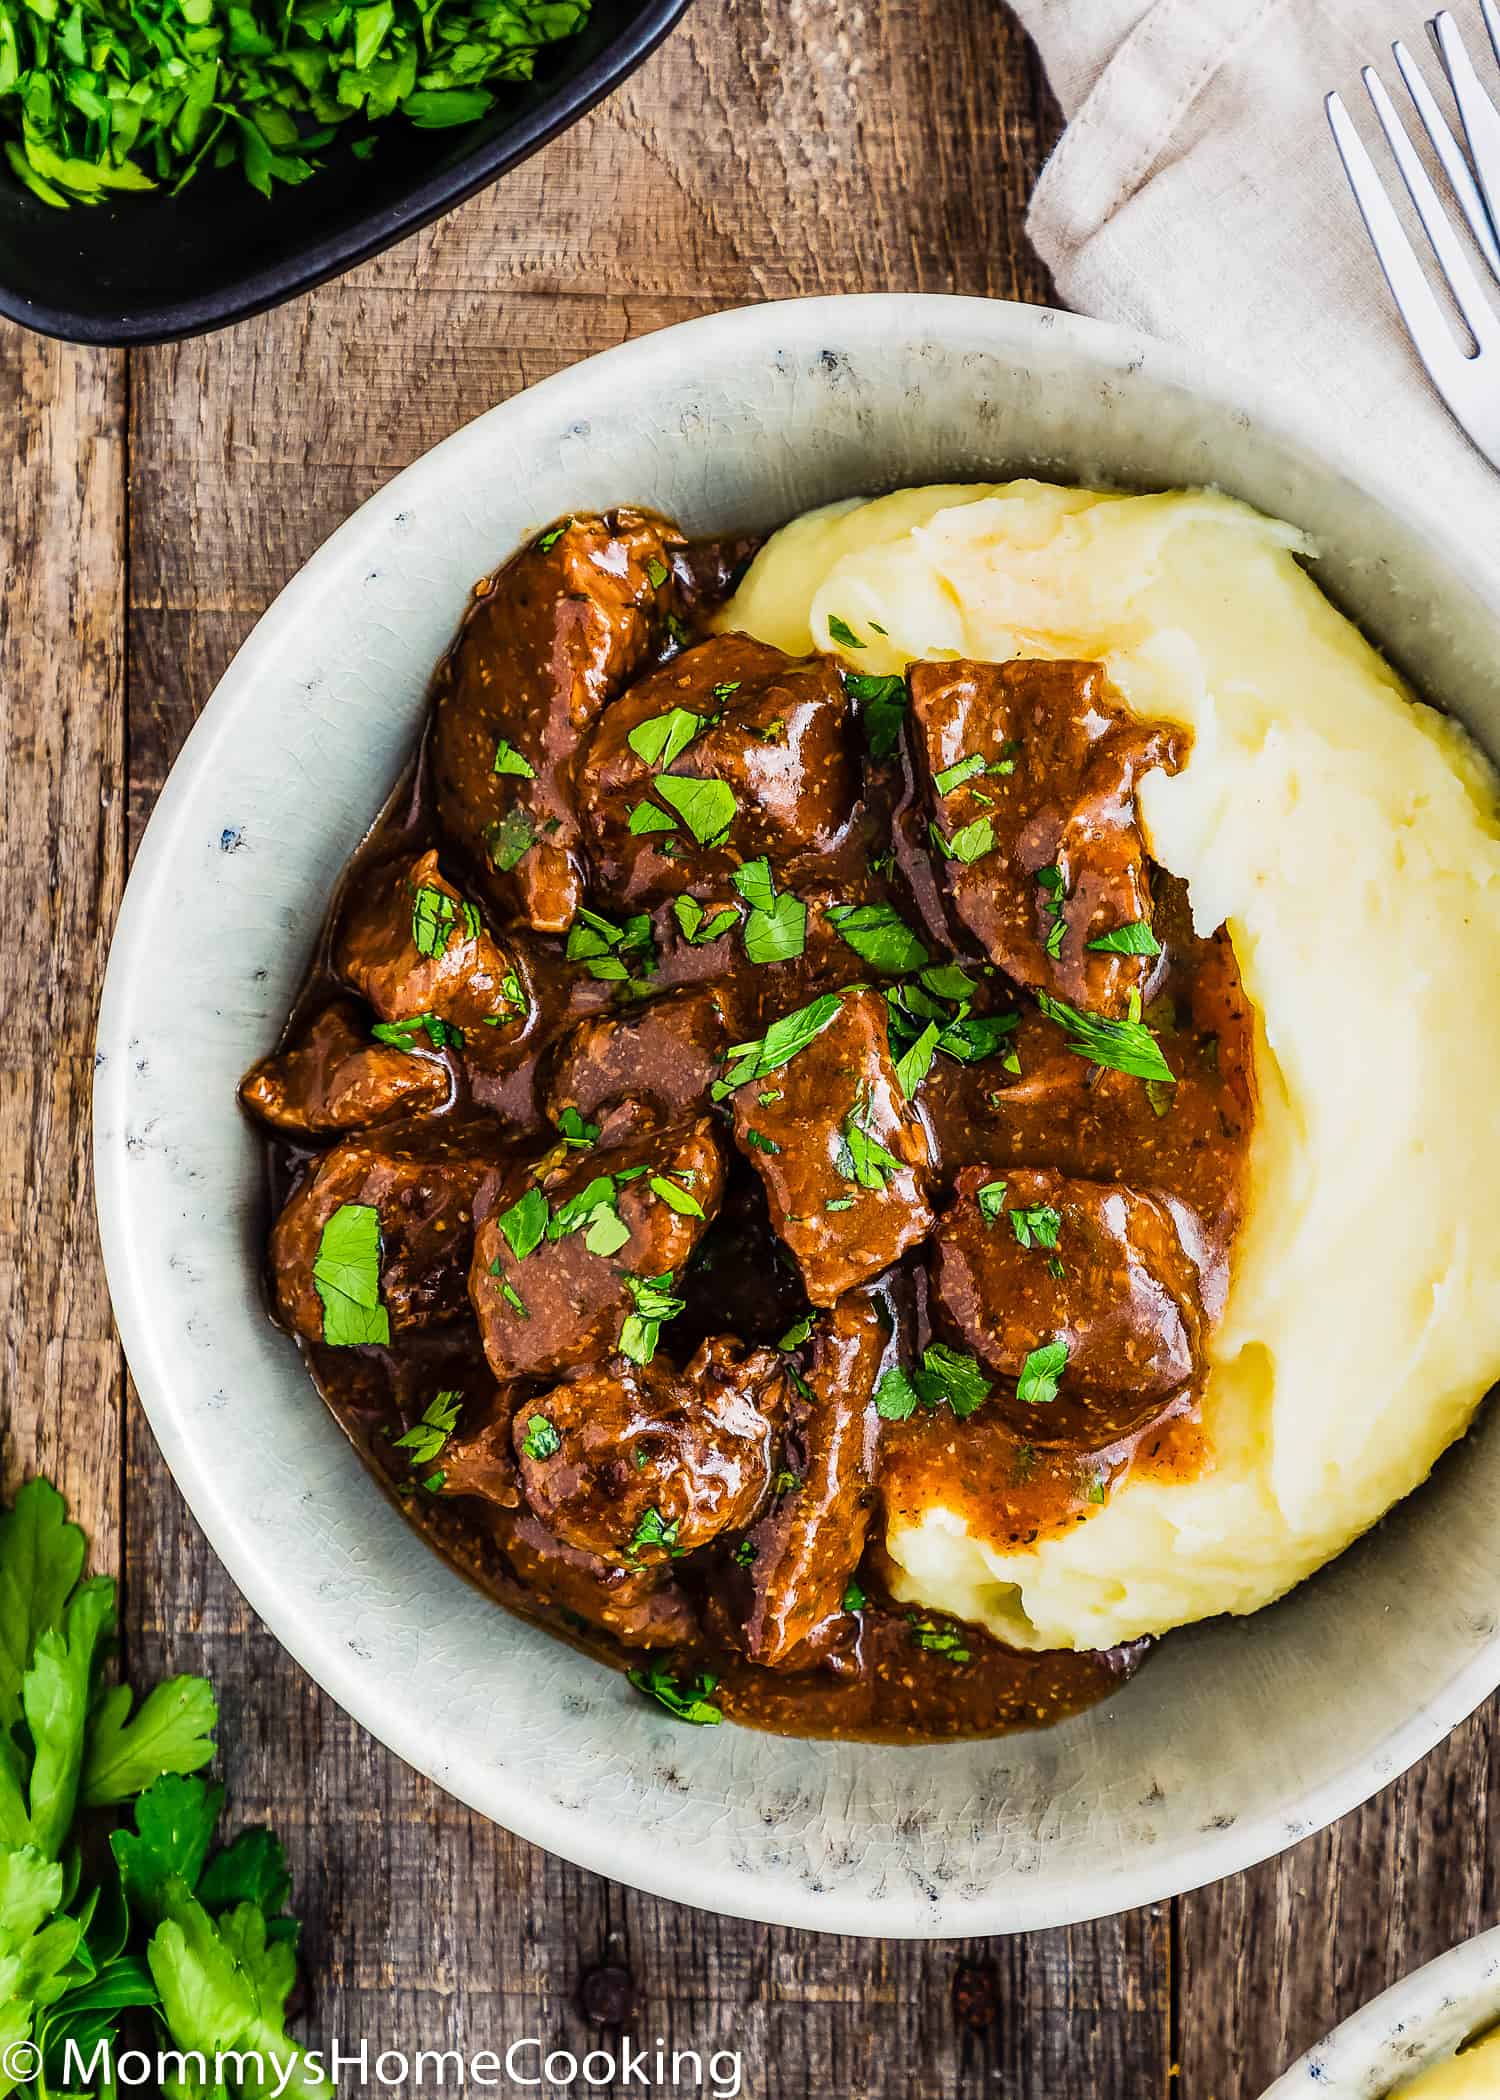 Easy Beef Tips with Gravy in a bowl with mashed potatoes and garnished with parsley.